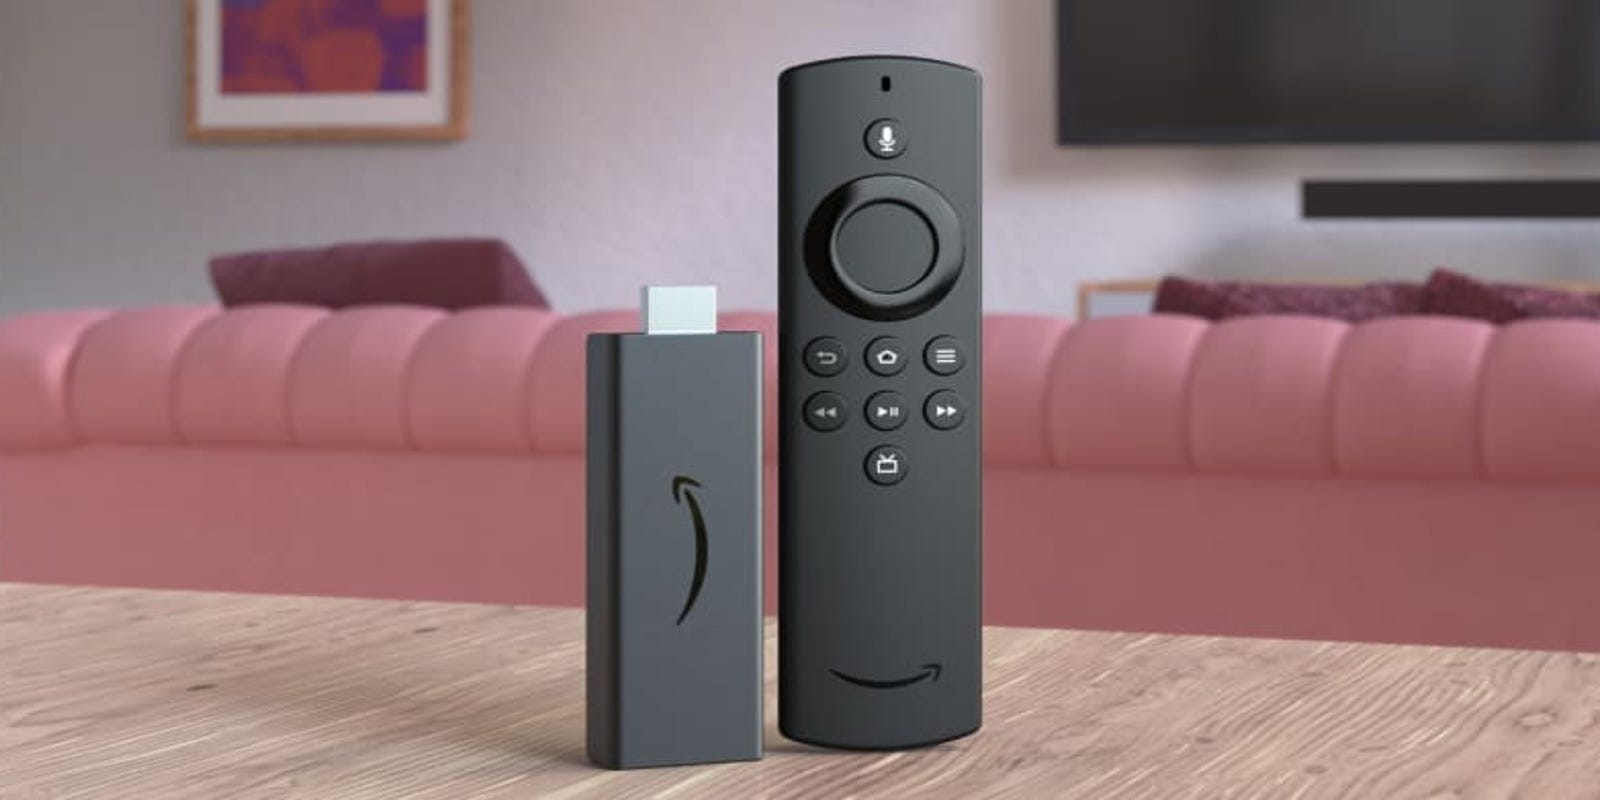 Amazon Fire Stick: Get this all-new device at its Black Friday 2020 price